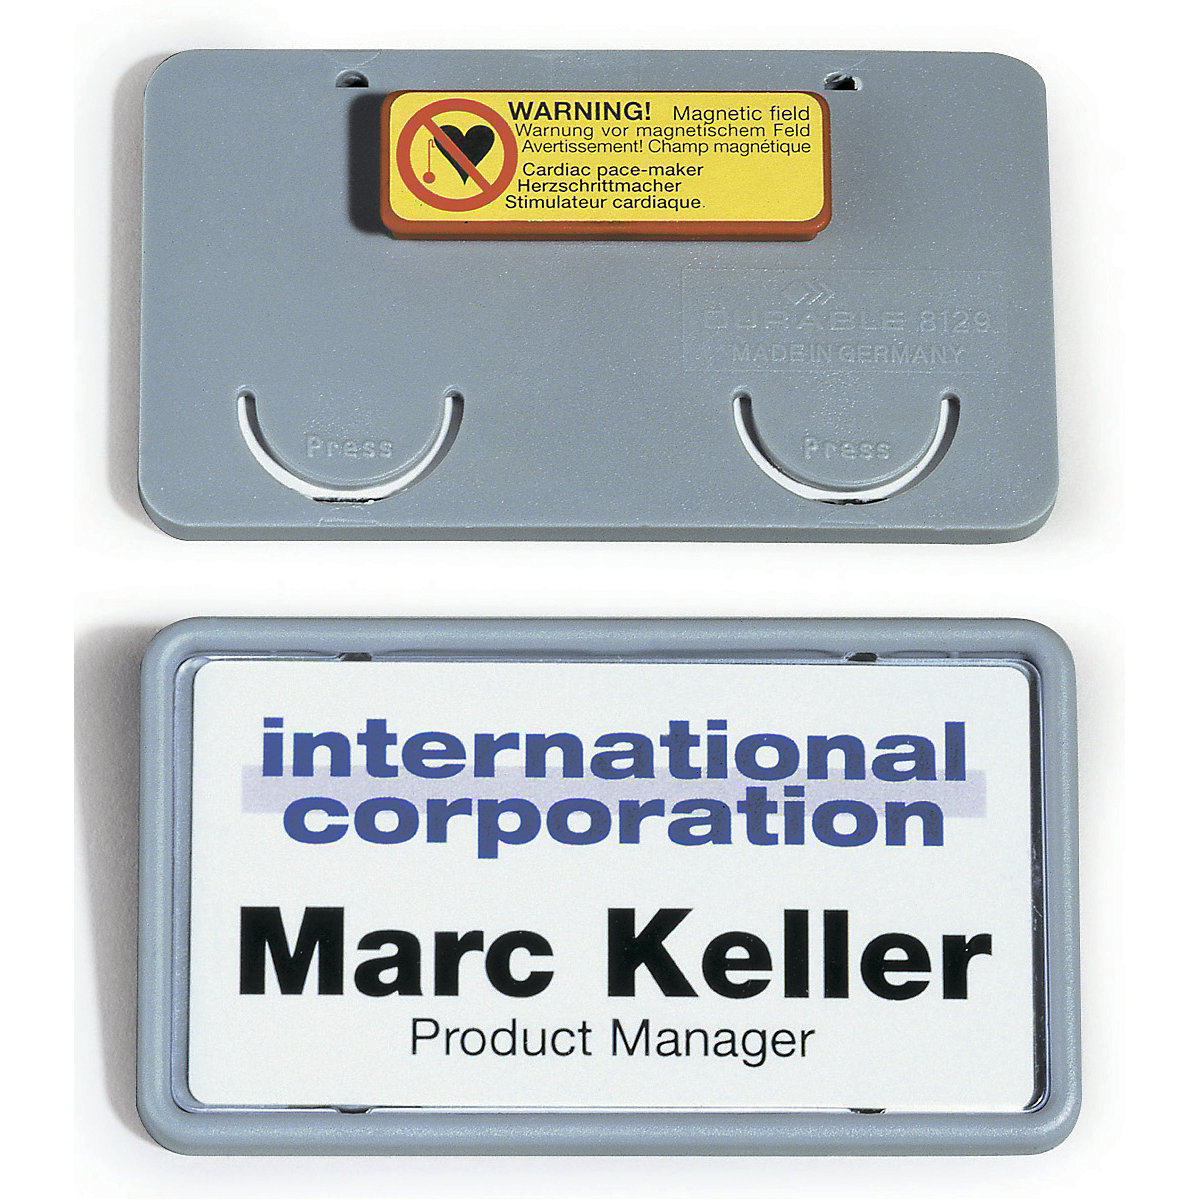 CLIP CARD with magnet – DURABLE